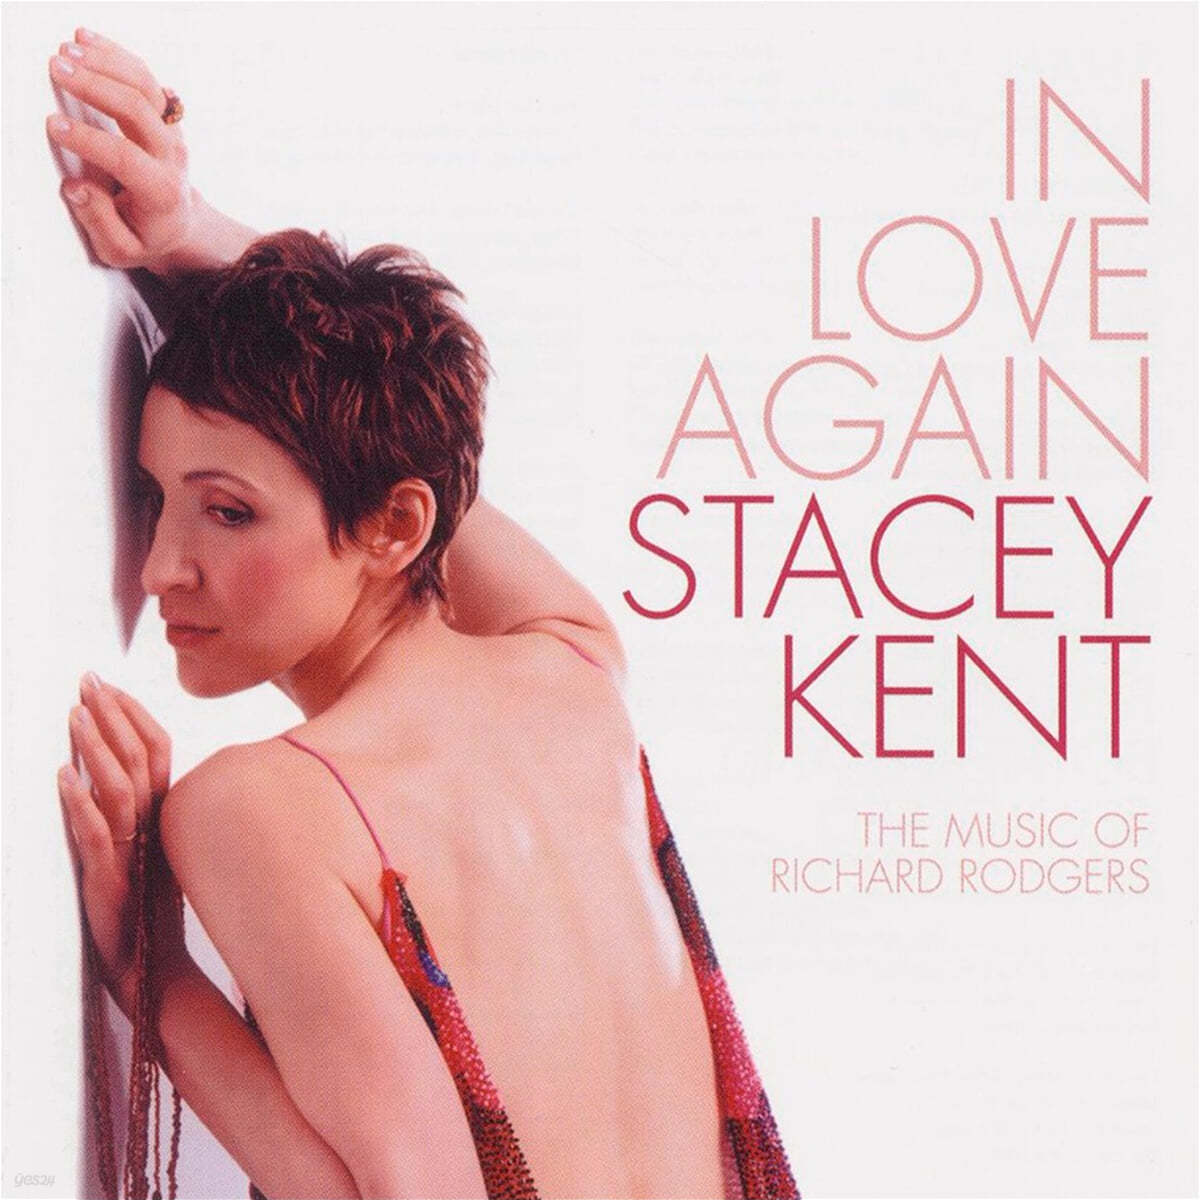 Stacey Kent (스테이시 켄트) - In Love Again: The Music Of Richard Rodgers [LP] 